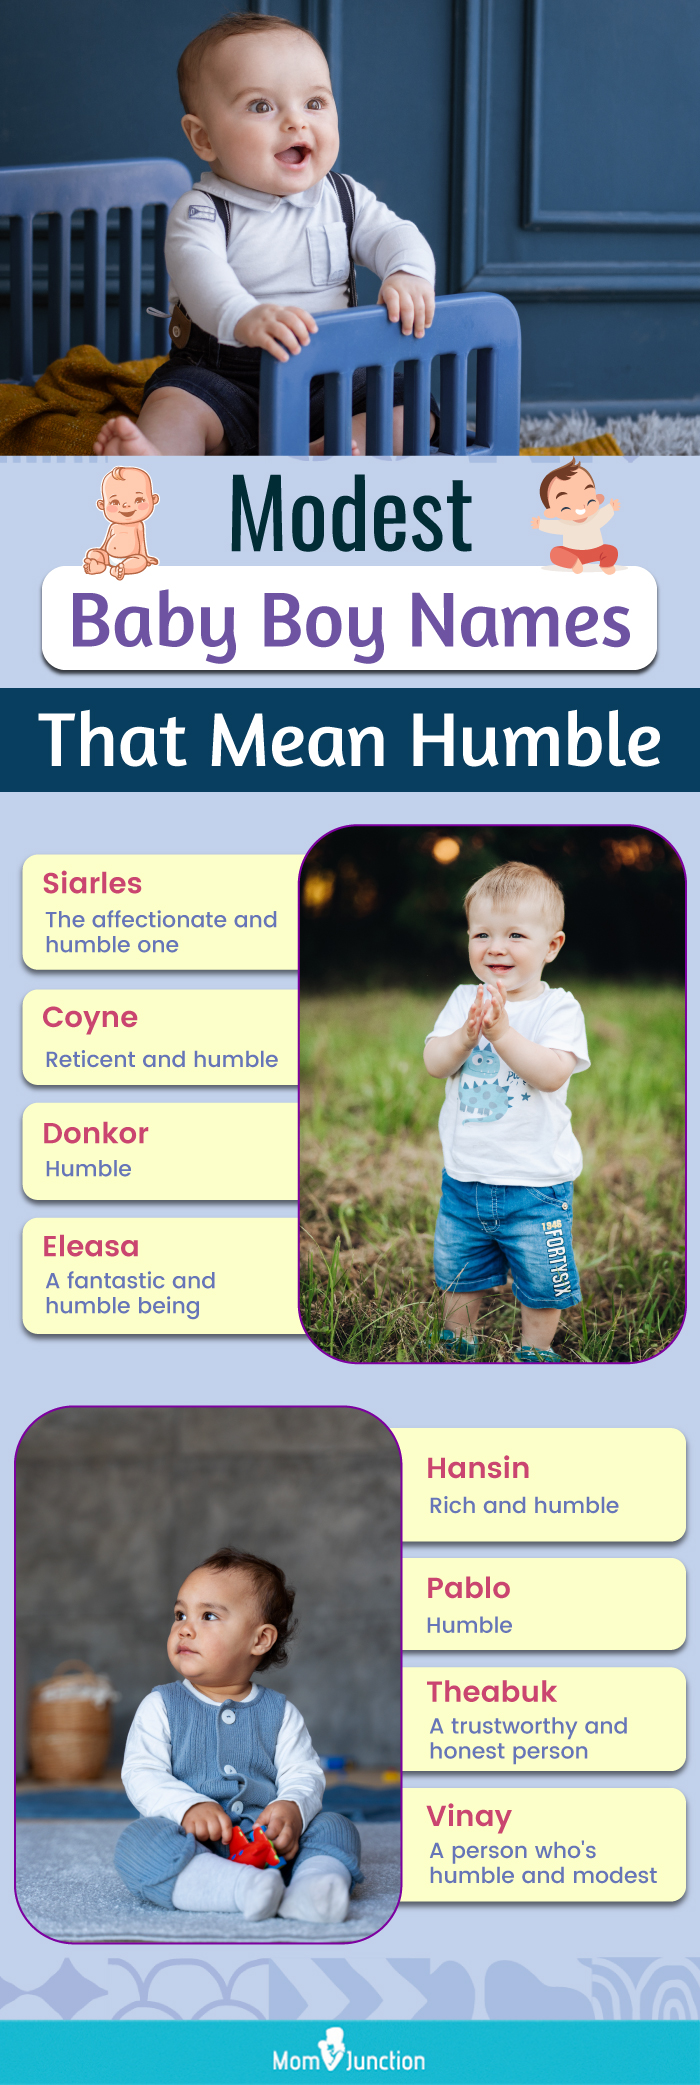 modest baby boy names that mean humble (infographic)